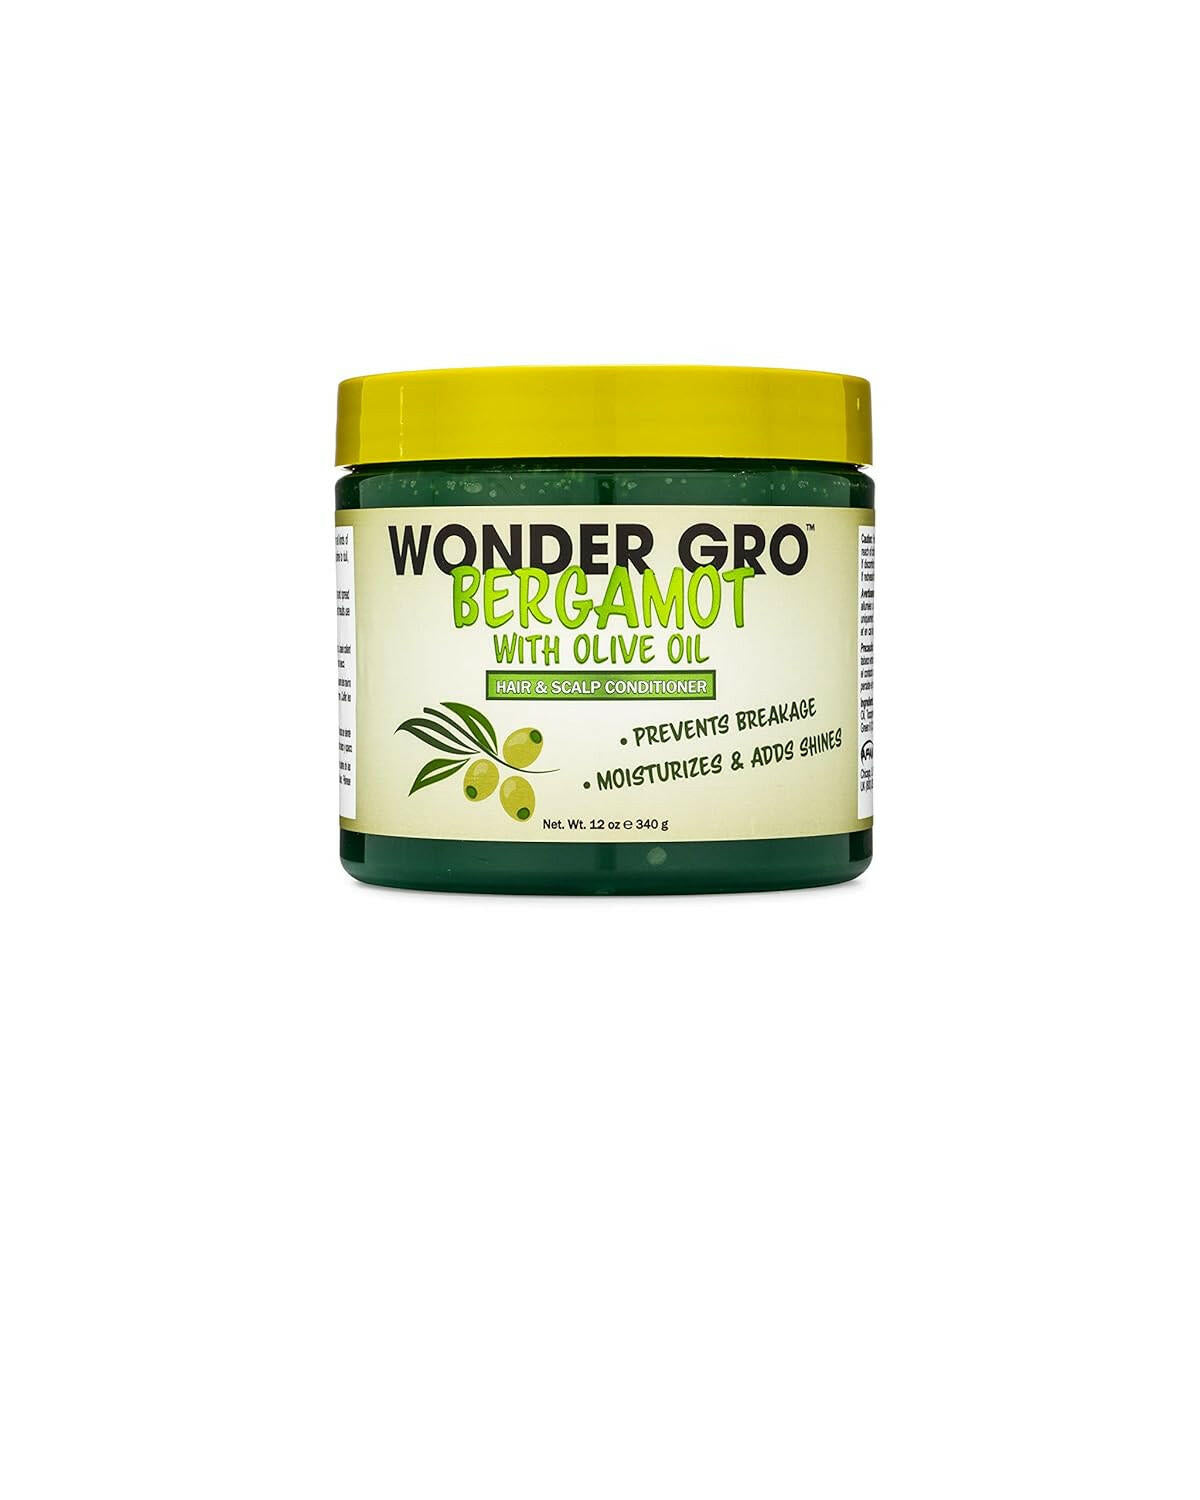 Wonder gro Bergamot with Olive Oil Hair Grease Styling Conditioner, 12oz